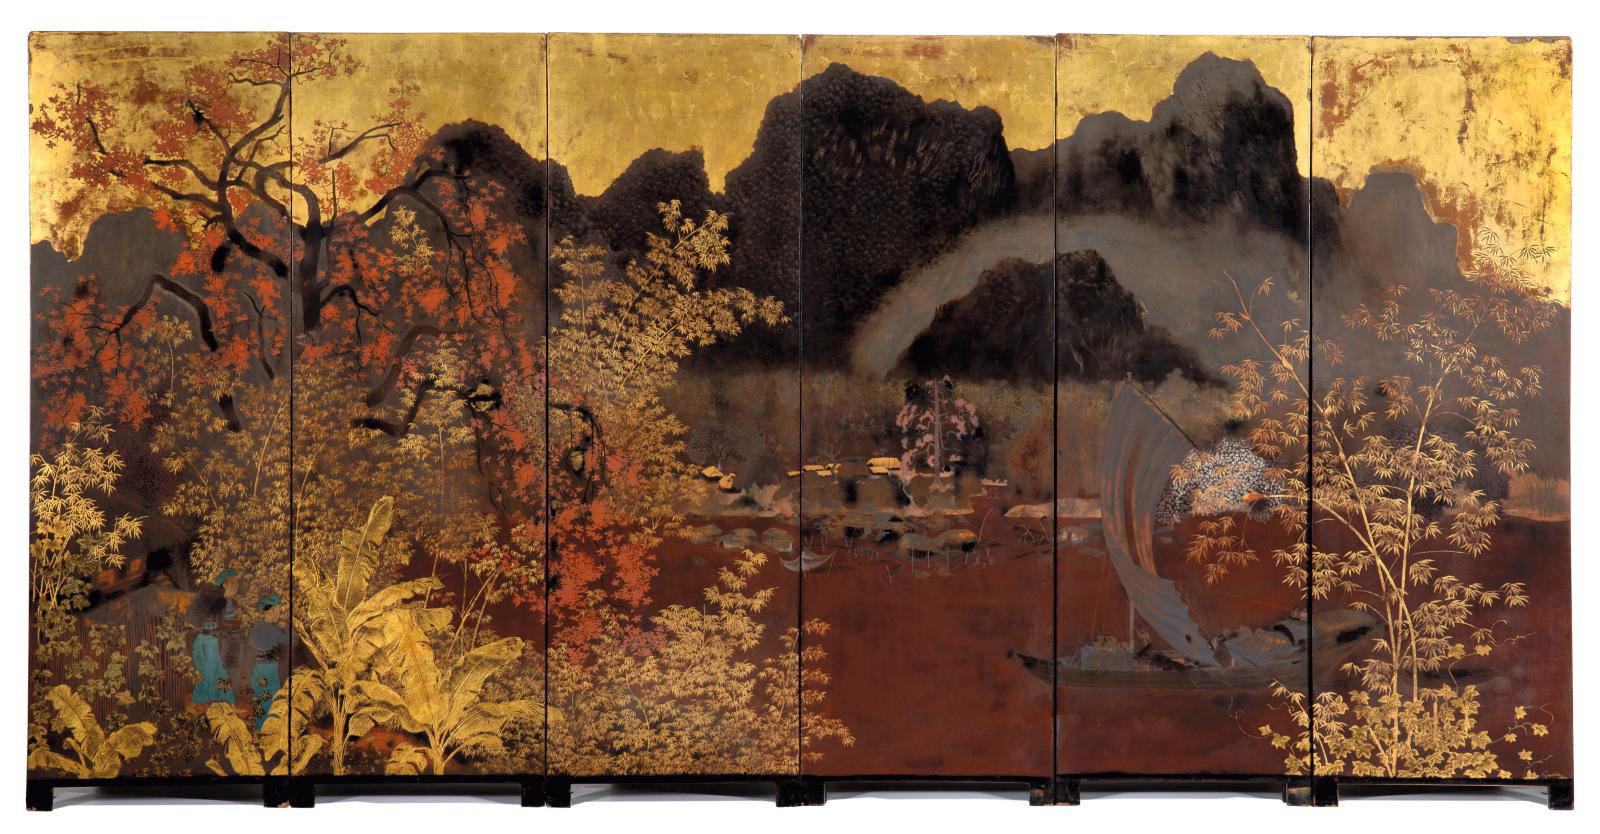 Lê Quoc Loc (1918–1987), The Cho Bo Rapids, 1942, six-leaf folding screen, lacquer with gold highlights, 100 x 32.7 cm/39.70 x 12.87 in ea